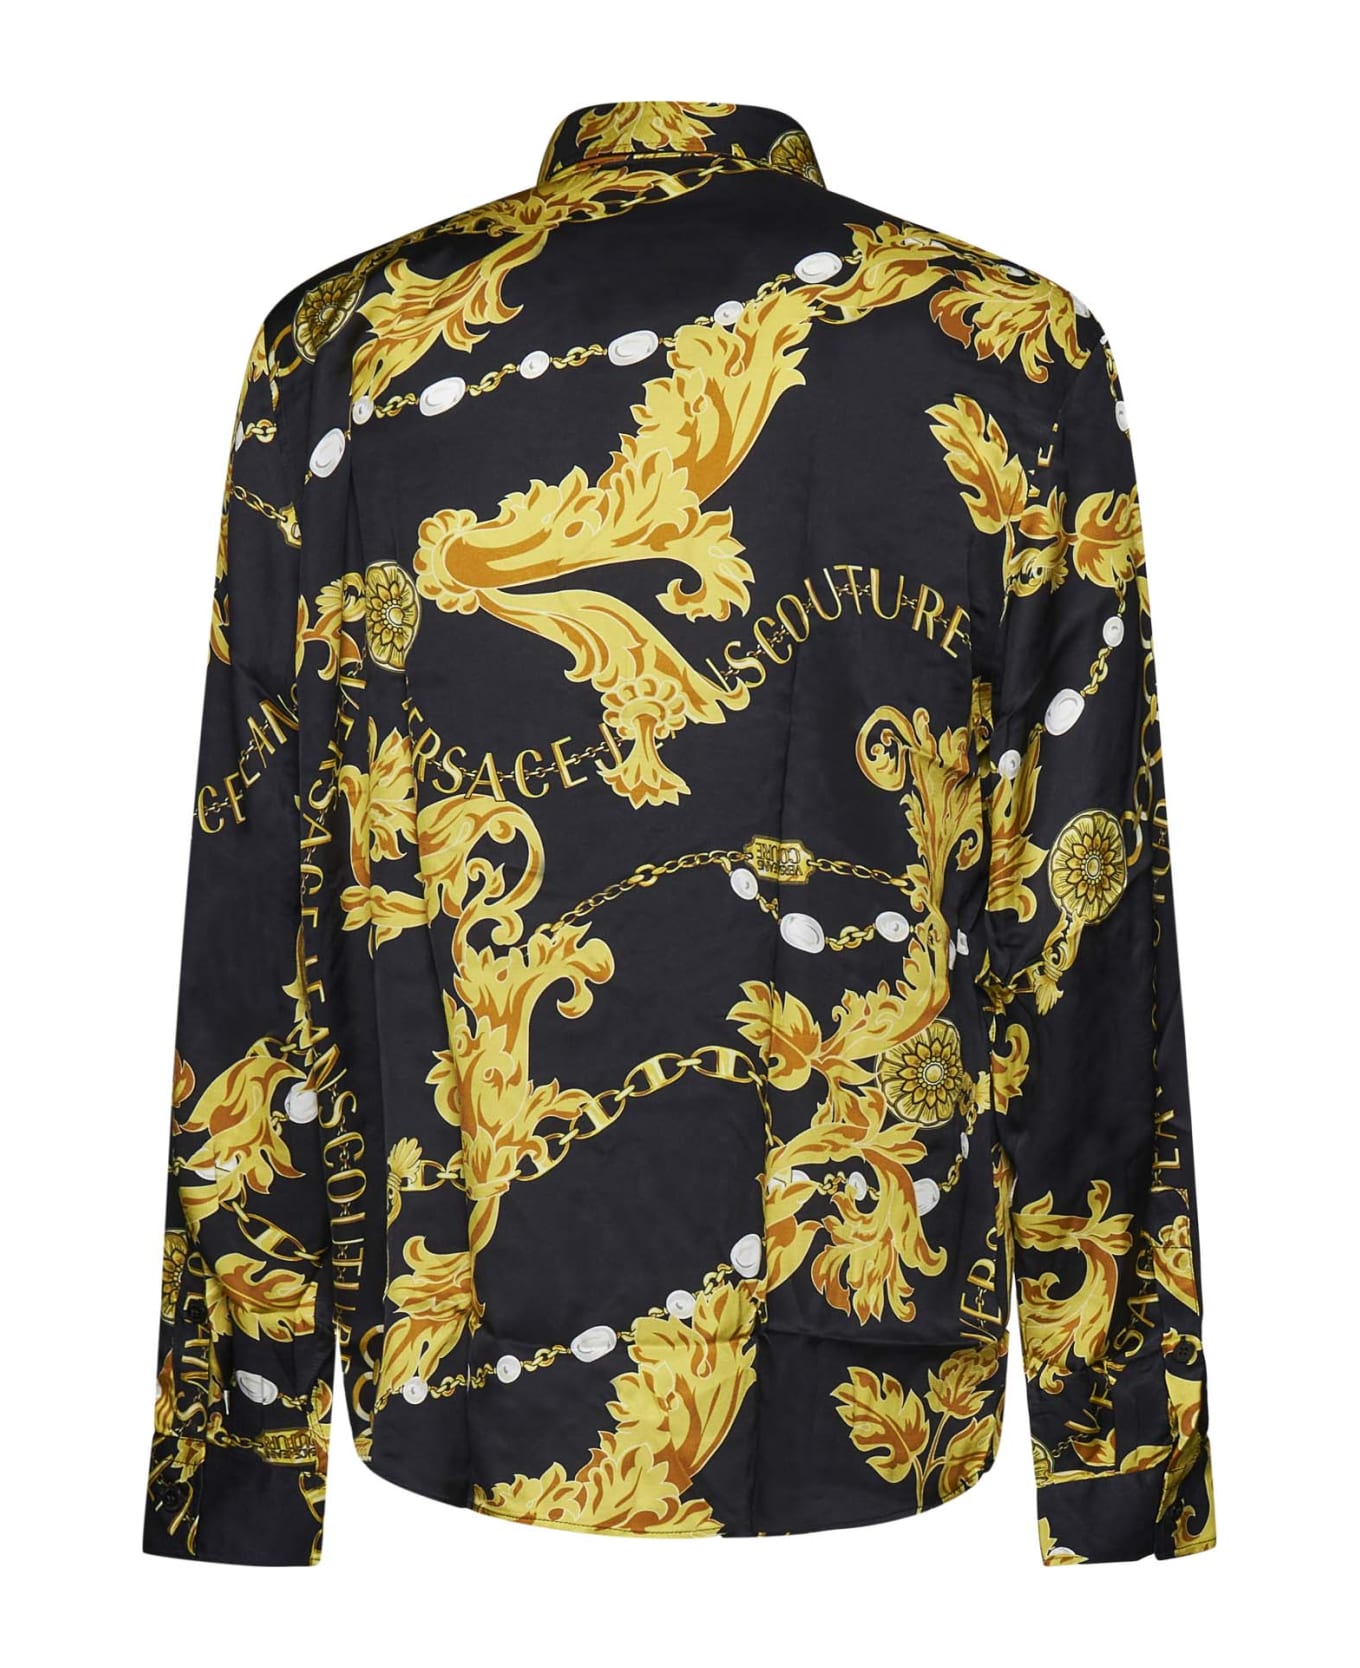 Versace Jeans Couture Shirt - Black Gold